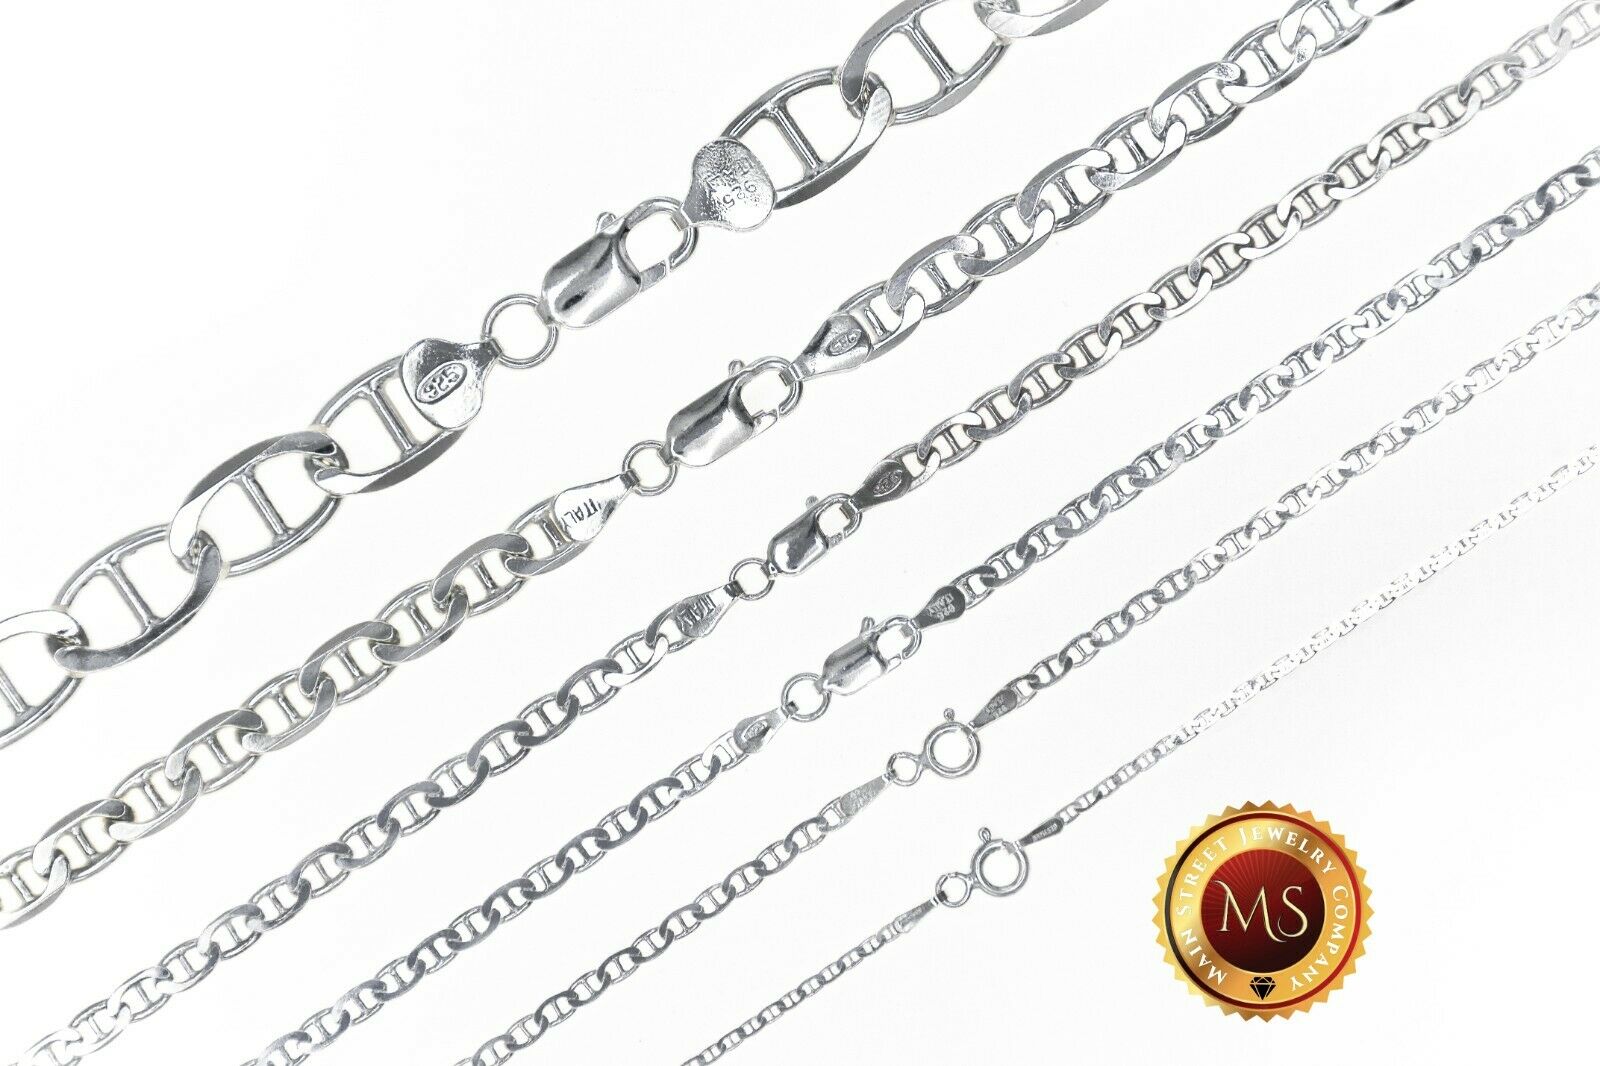 Italy 925 Solid Sterling Silver Mariner Chain Necklace Or Bracelet  7" - 36"